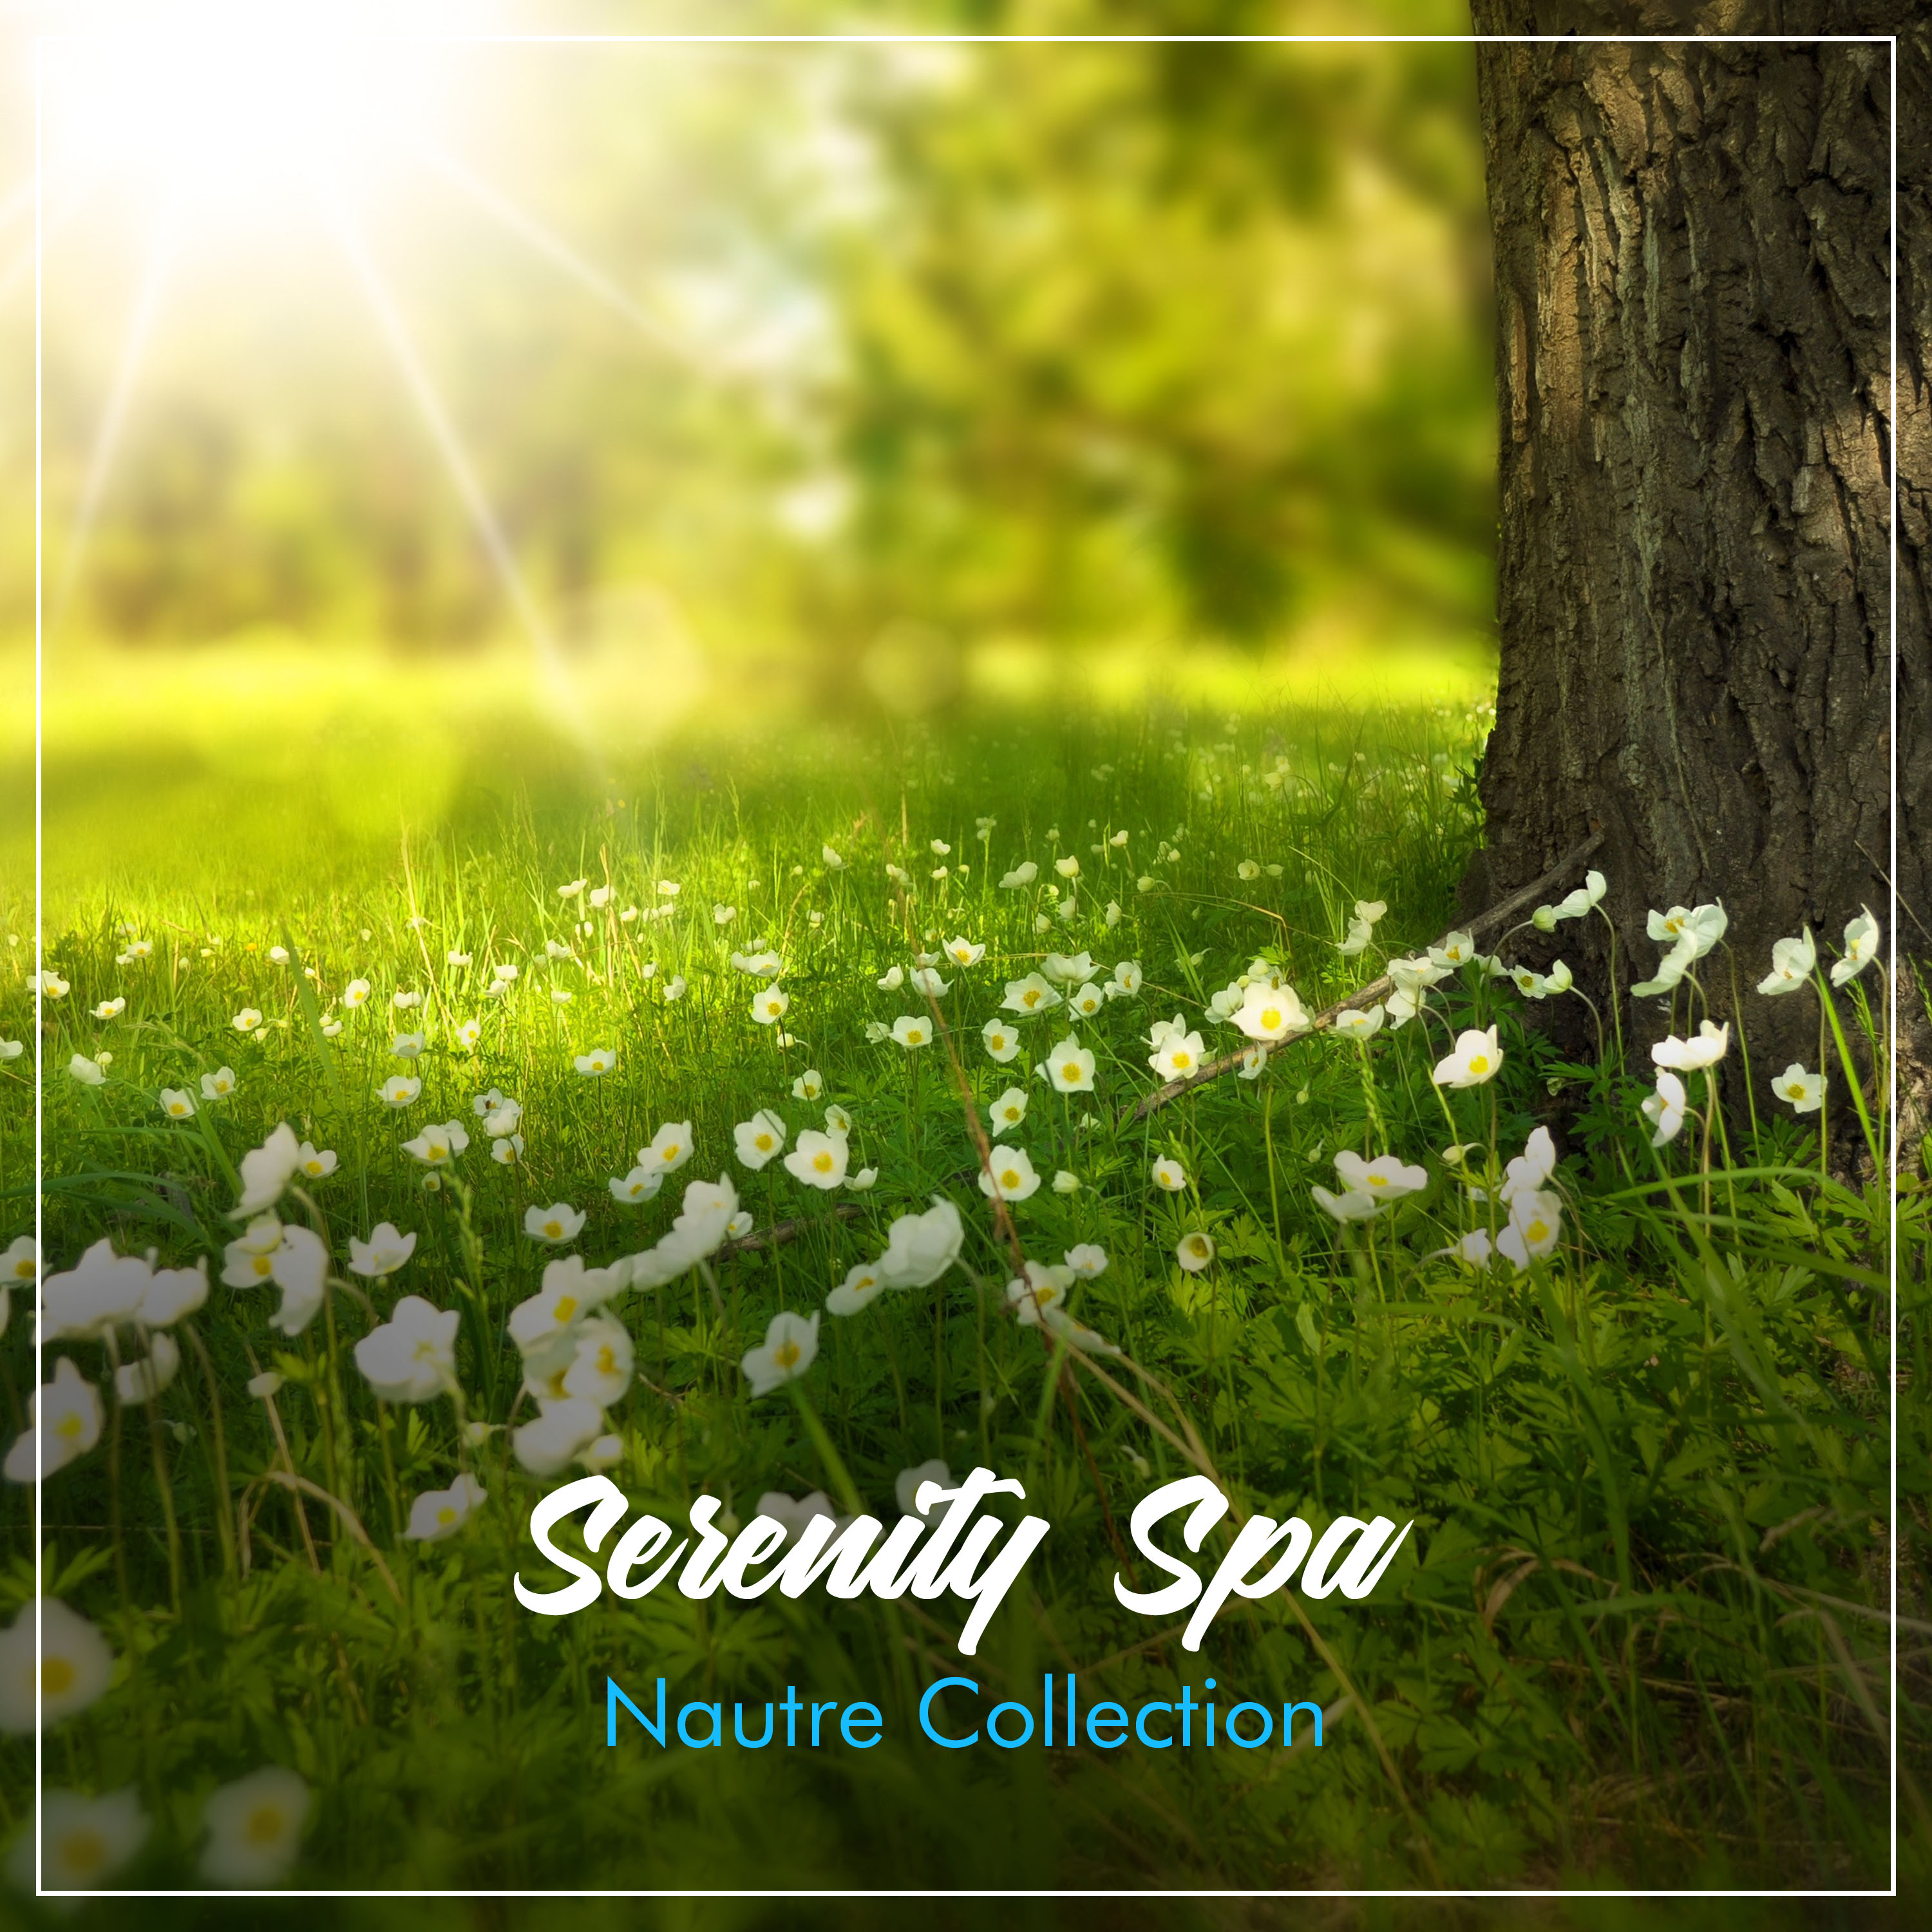 2018 Serenity Spa Nature Collection: Unwind, Let Go & Relax